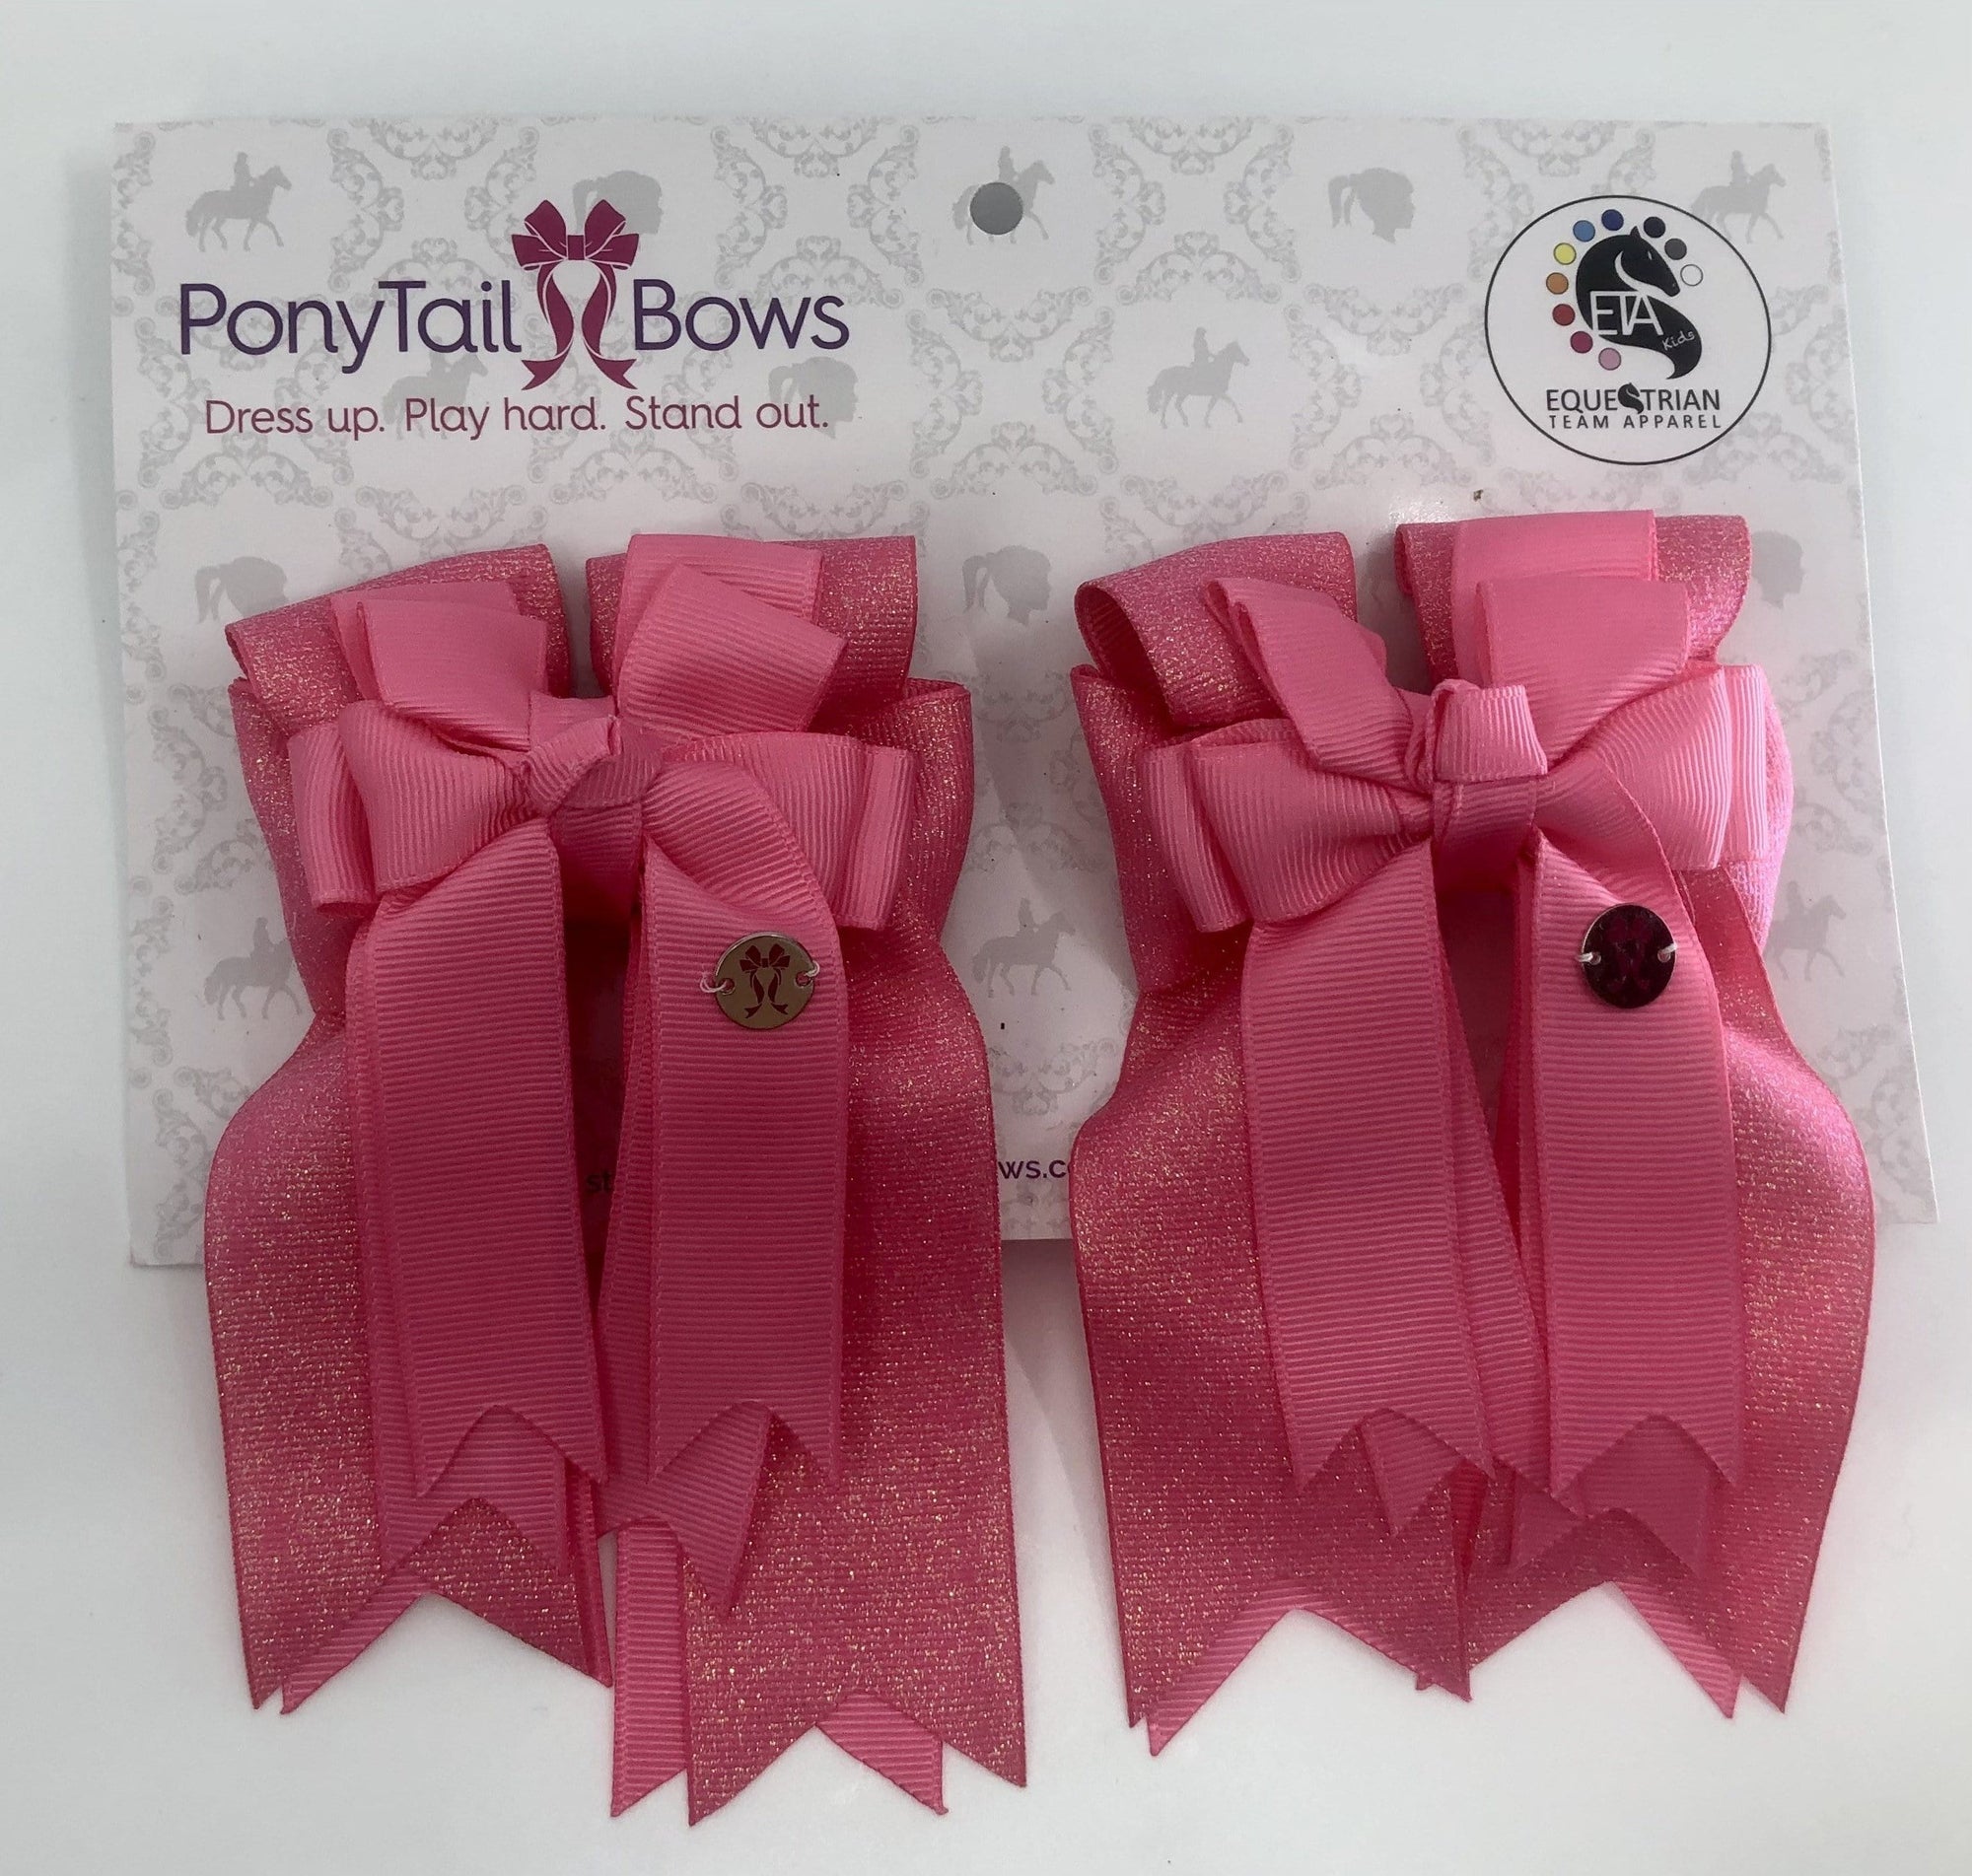 PonyTail Bows 3" Tails Hot Pink PonyTail Bows equestrian team apparel online tack store mobile tack store custom farm apparel custom show stable clothing equestrian lifestyle horse show clothing riding clothes Abbie Horse Show Bows | PonyTail Bows | Equestrian Hair Accessories horses equestrian tack store